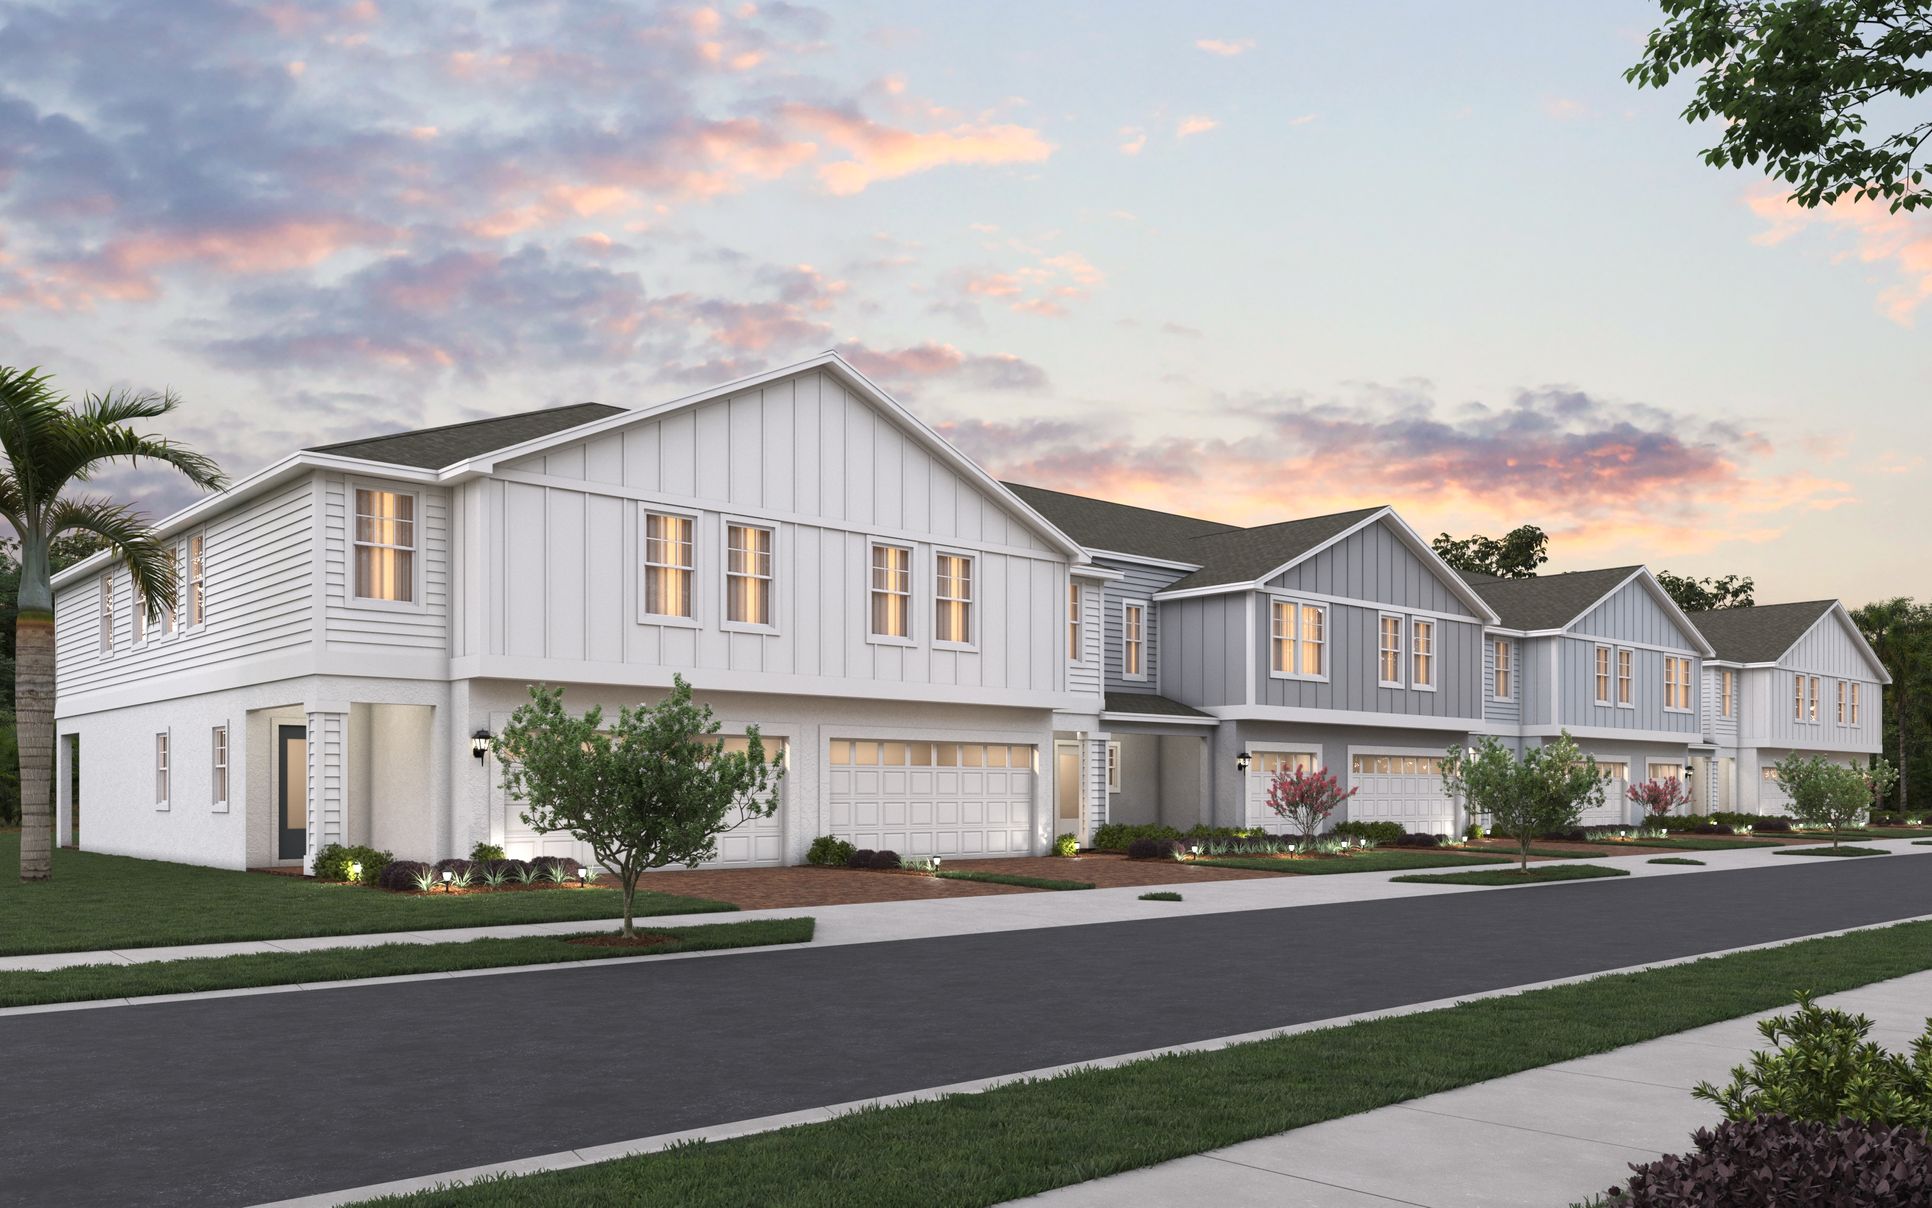 Blue Springs Reserve Townhomes - All Units:Blue Springs Reserve Townhomes - All Units